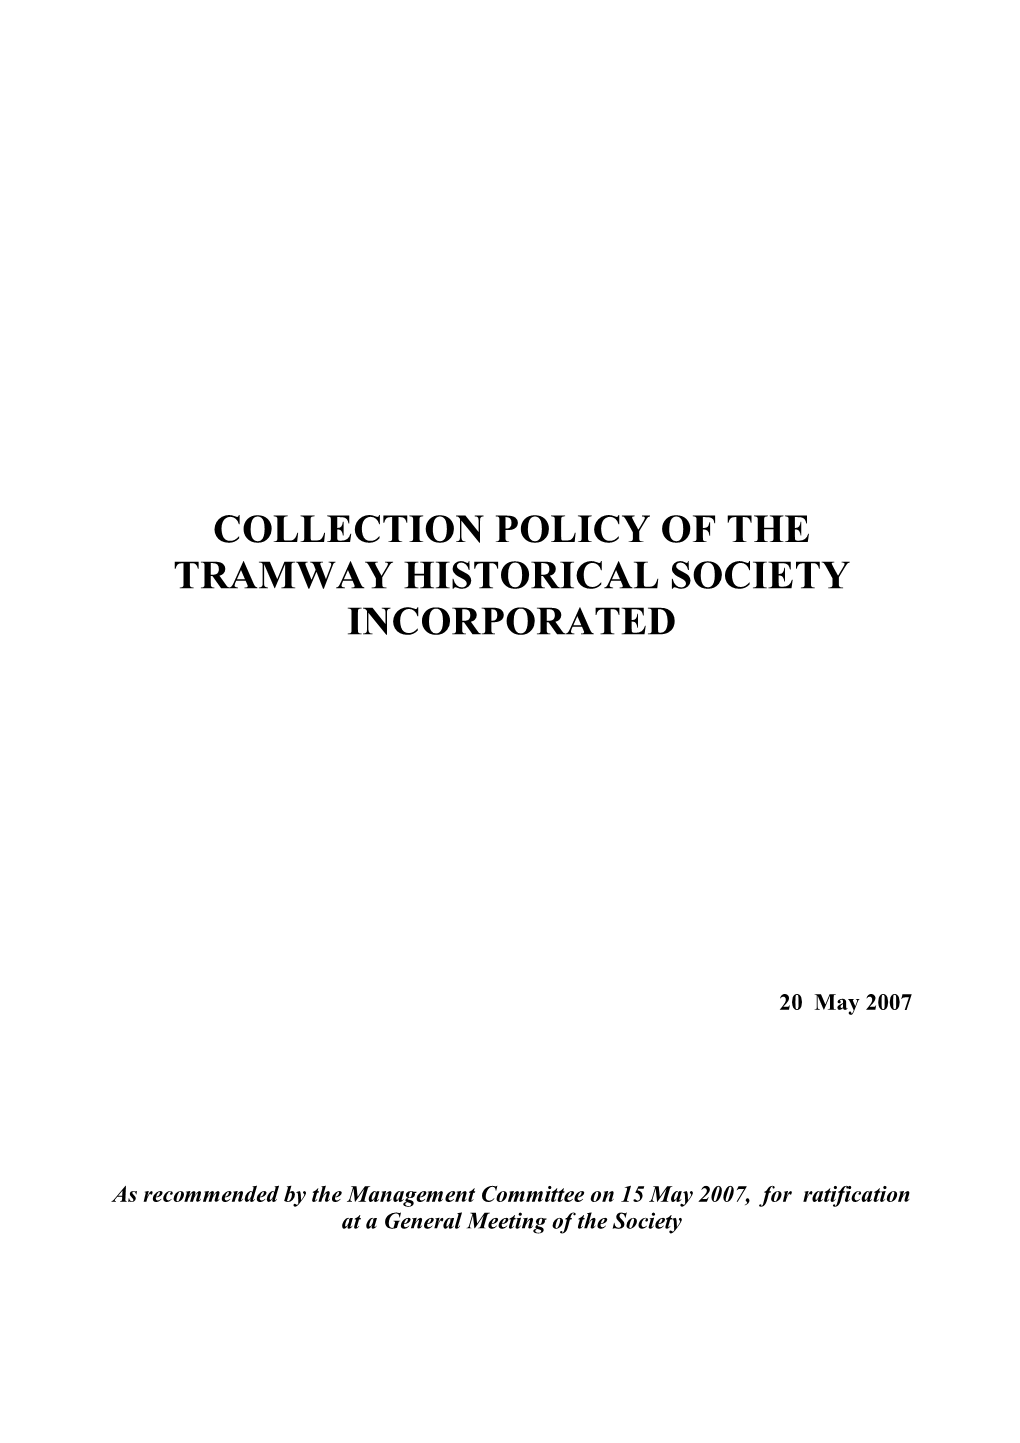 Collection Policy of the Tramway Historical Society Incorporated